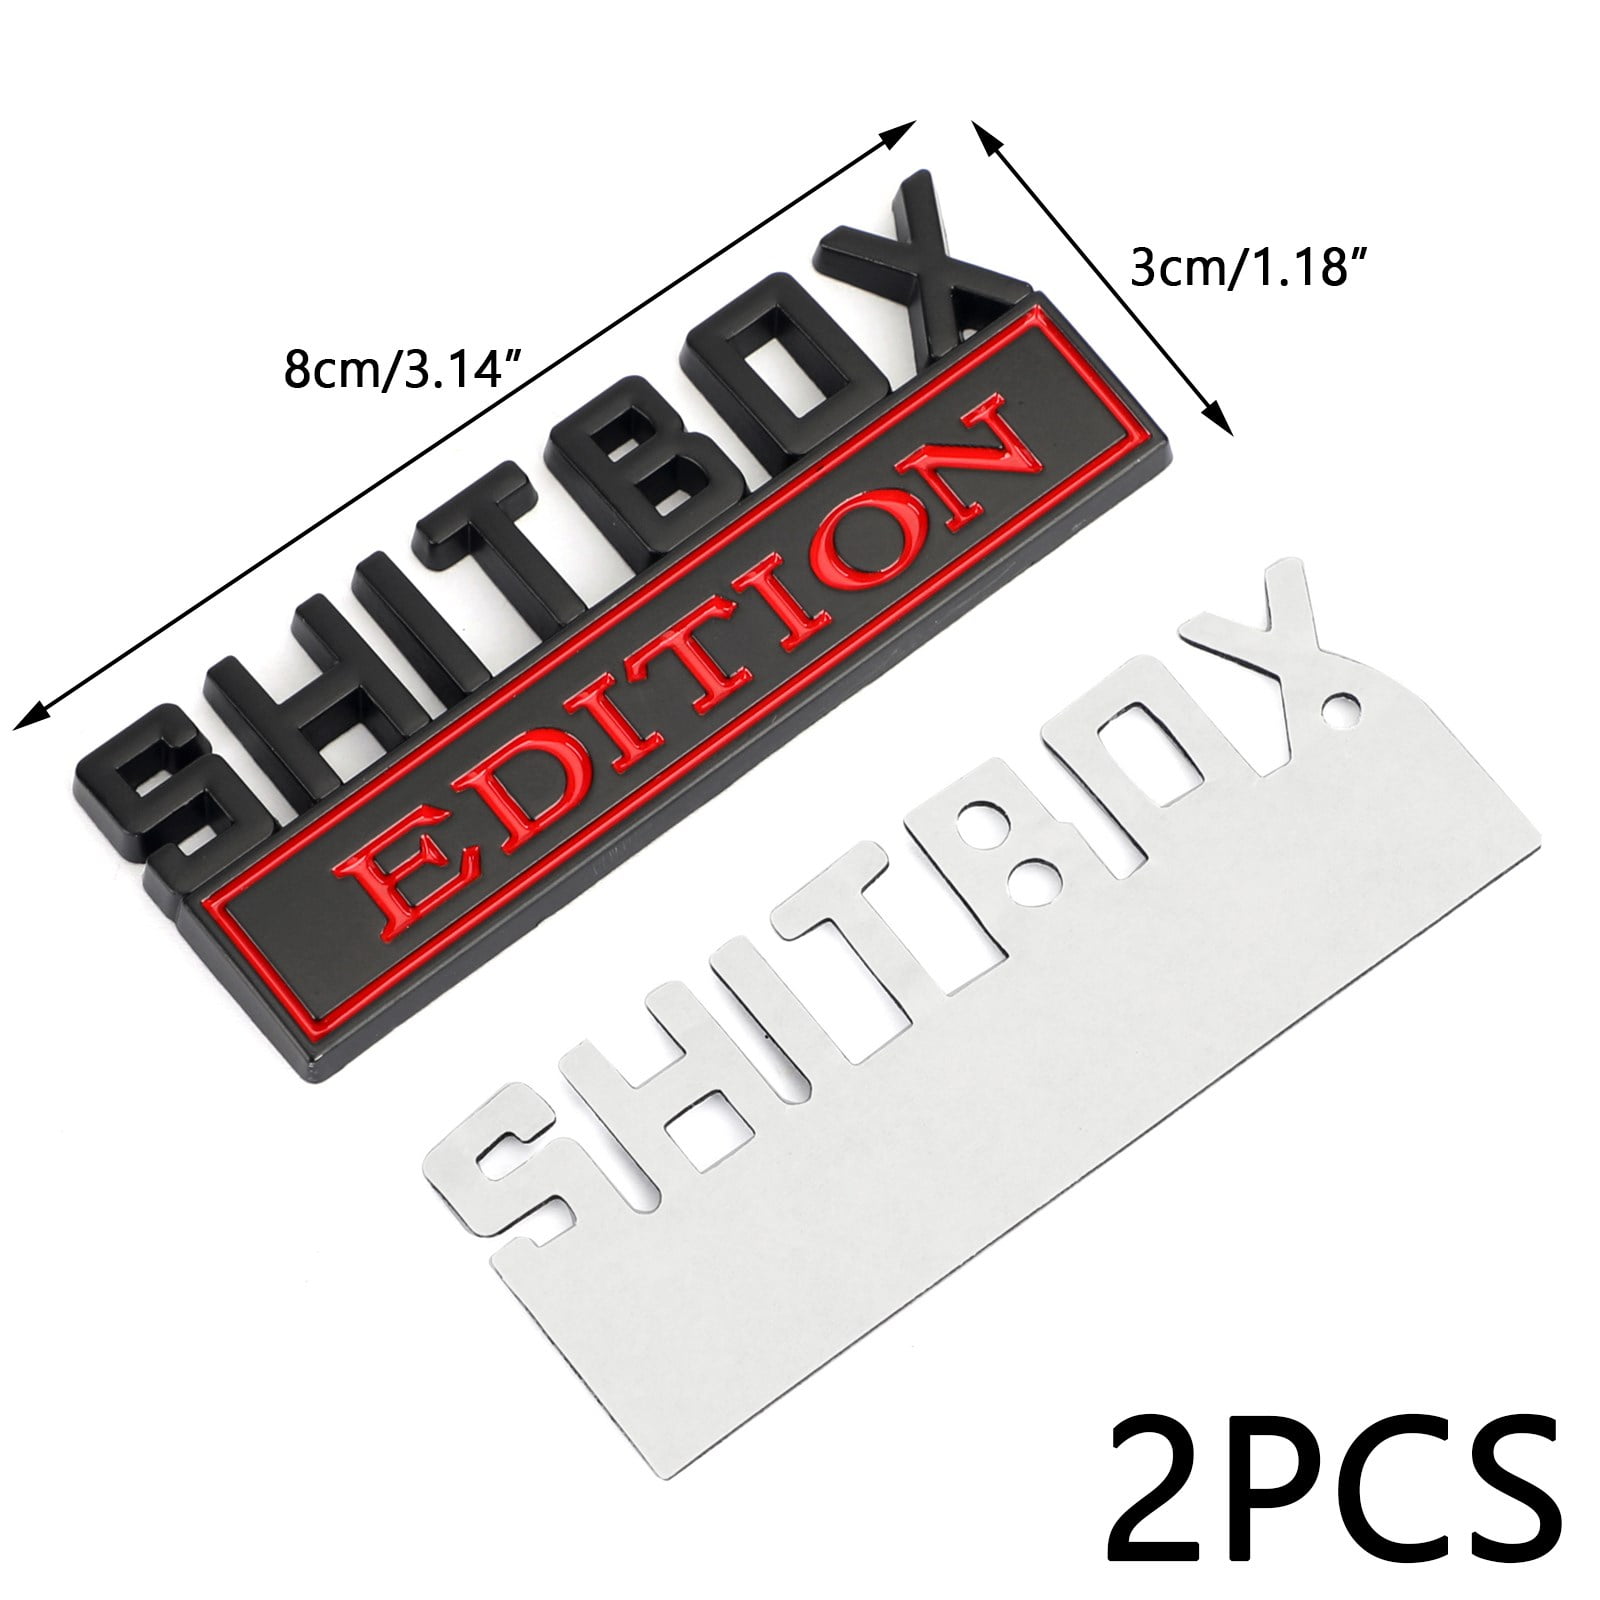 2pc SHITBOX EDITION Emblem Decal Badges Stickers fits Ford Chevy Car Truck